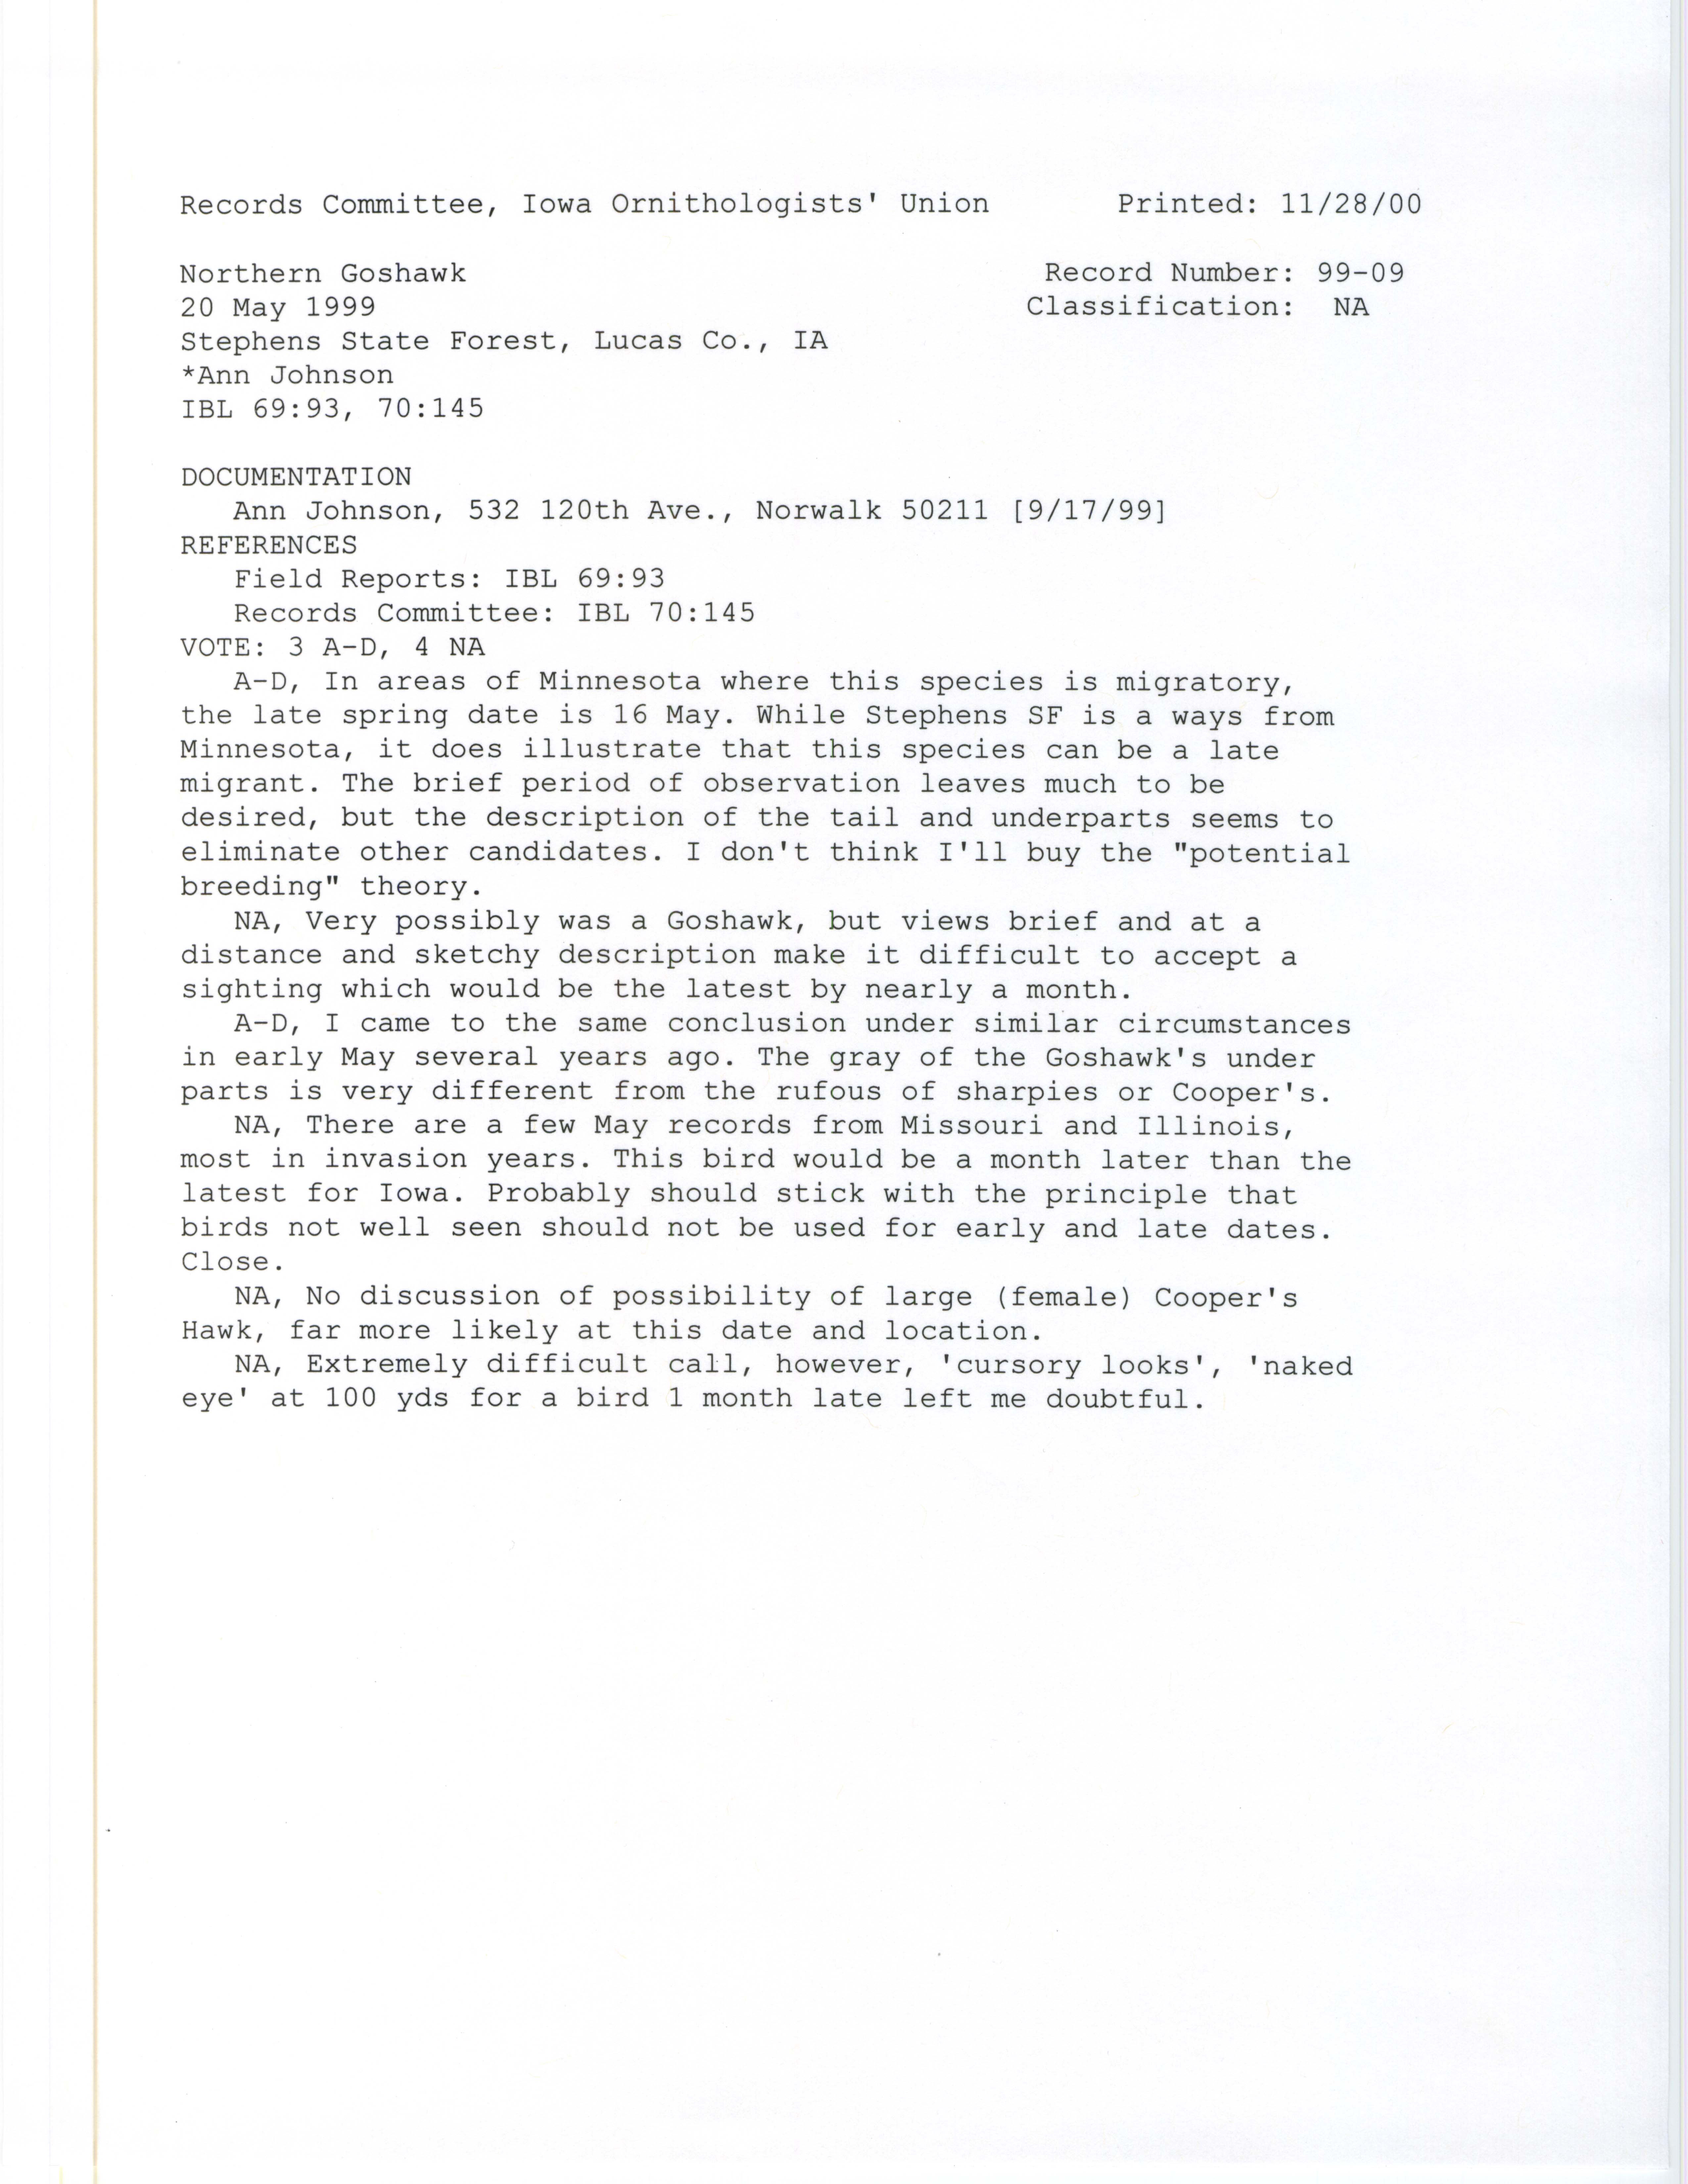 Records Committee review for rare bird sighting of Northern Goshawk at Stephens State Forest, 1999